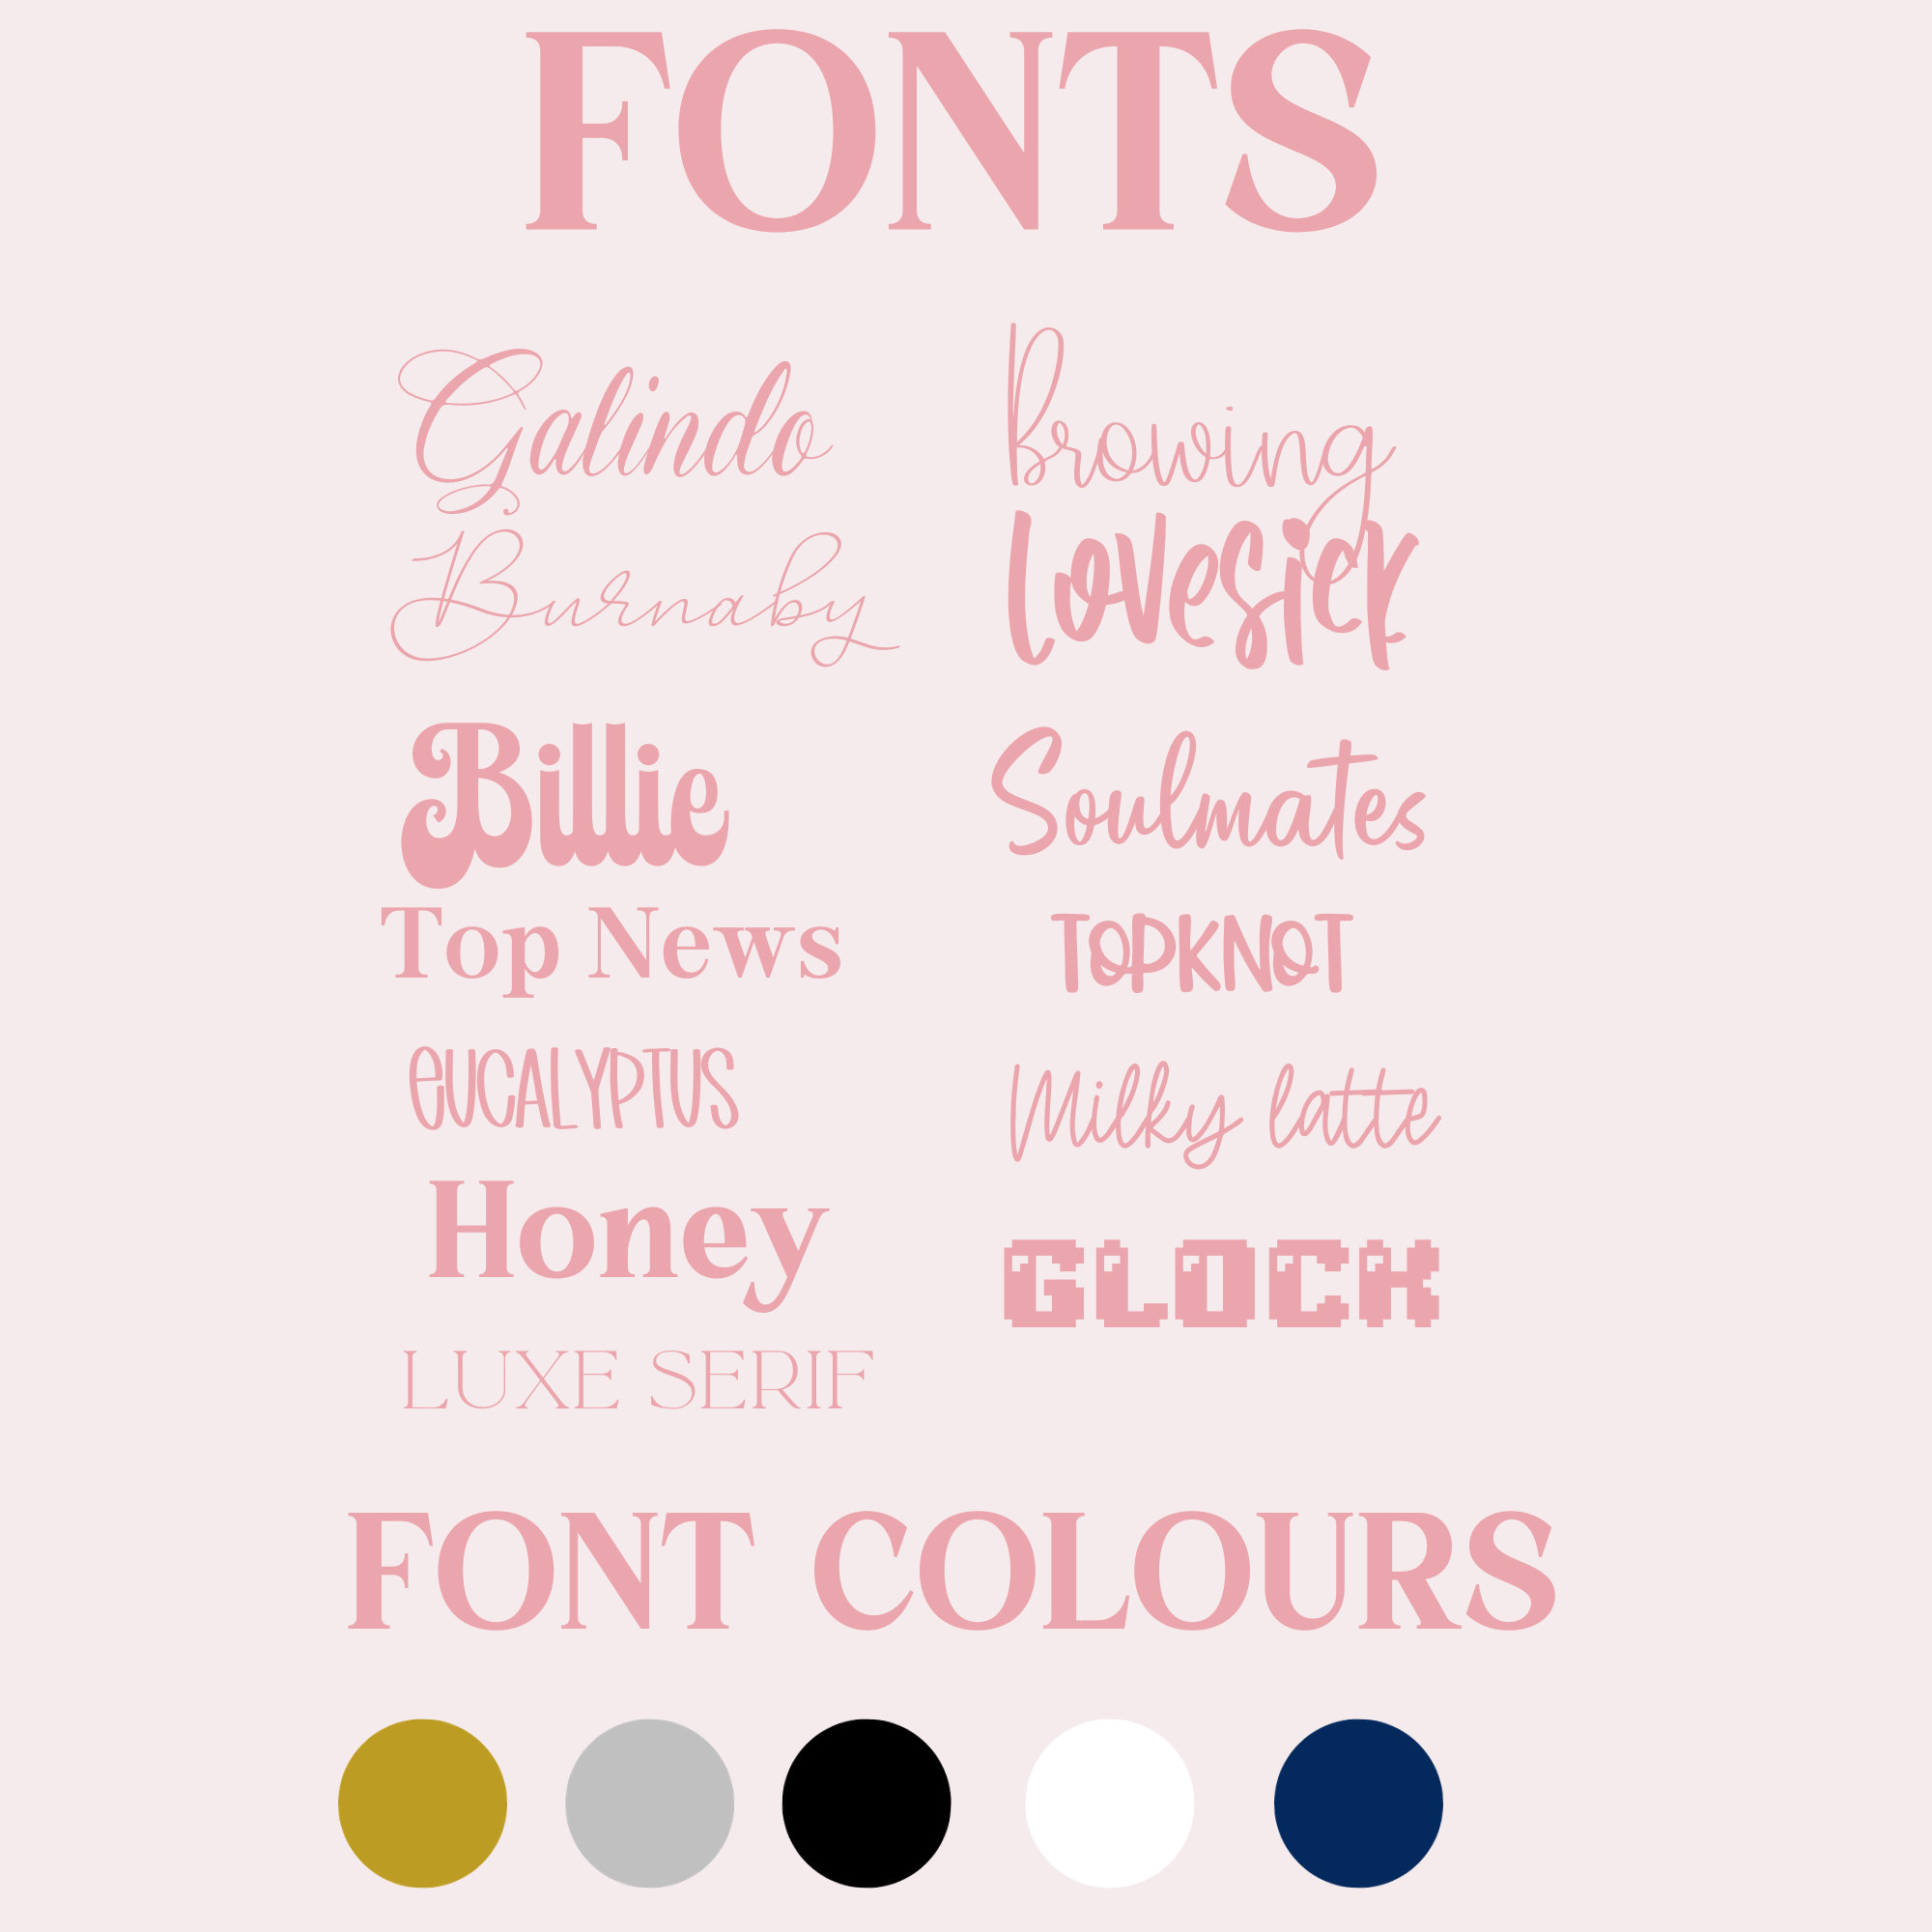 Font color and style options